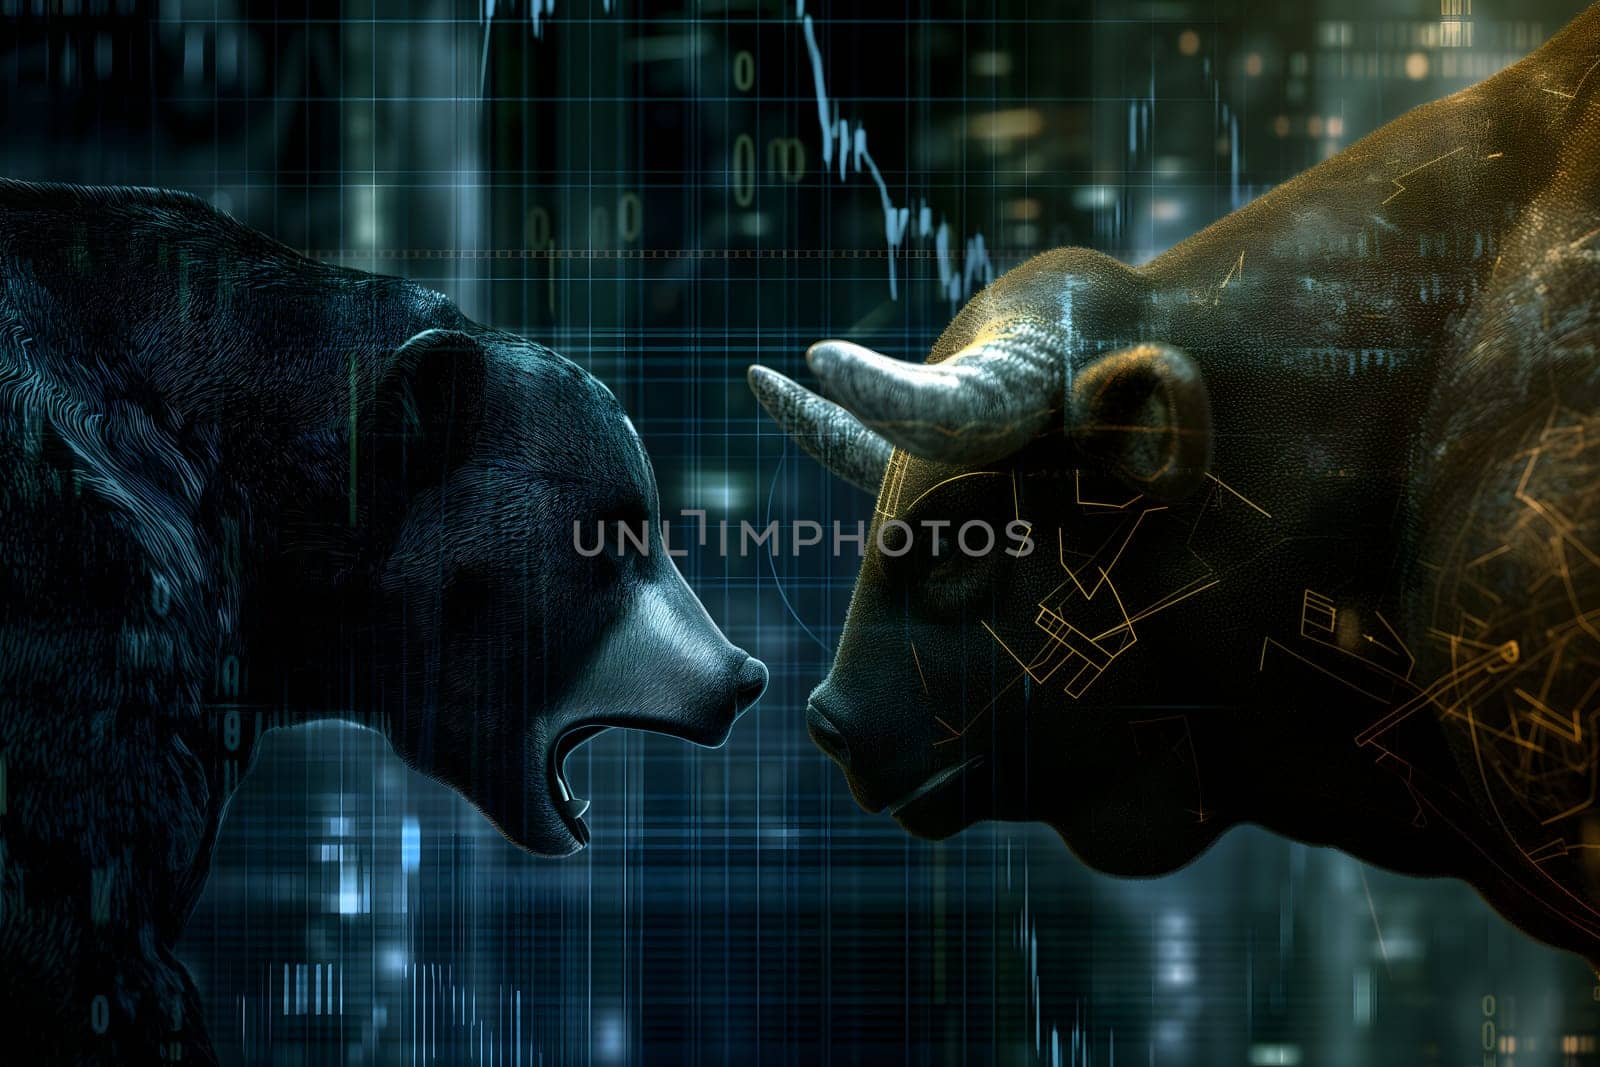 Bear and bull going head to head with trading charts behind them, in the style of stock market, wild and daring. Neural network generated image. Not based on any actual person or scene.